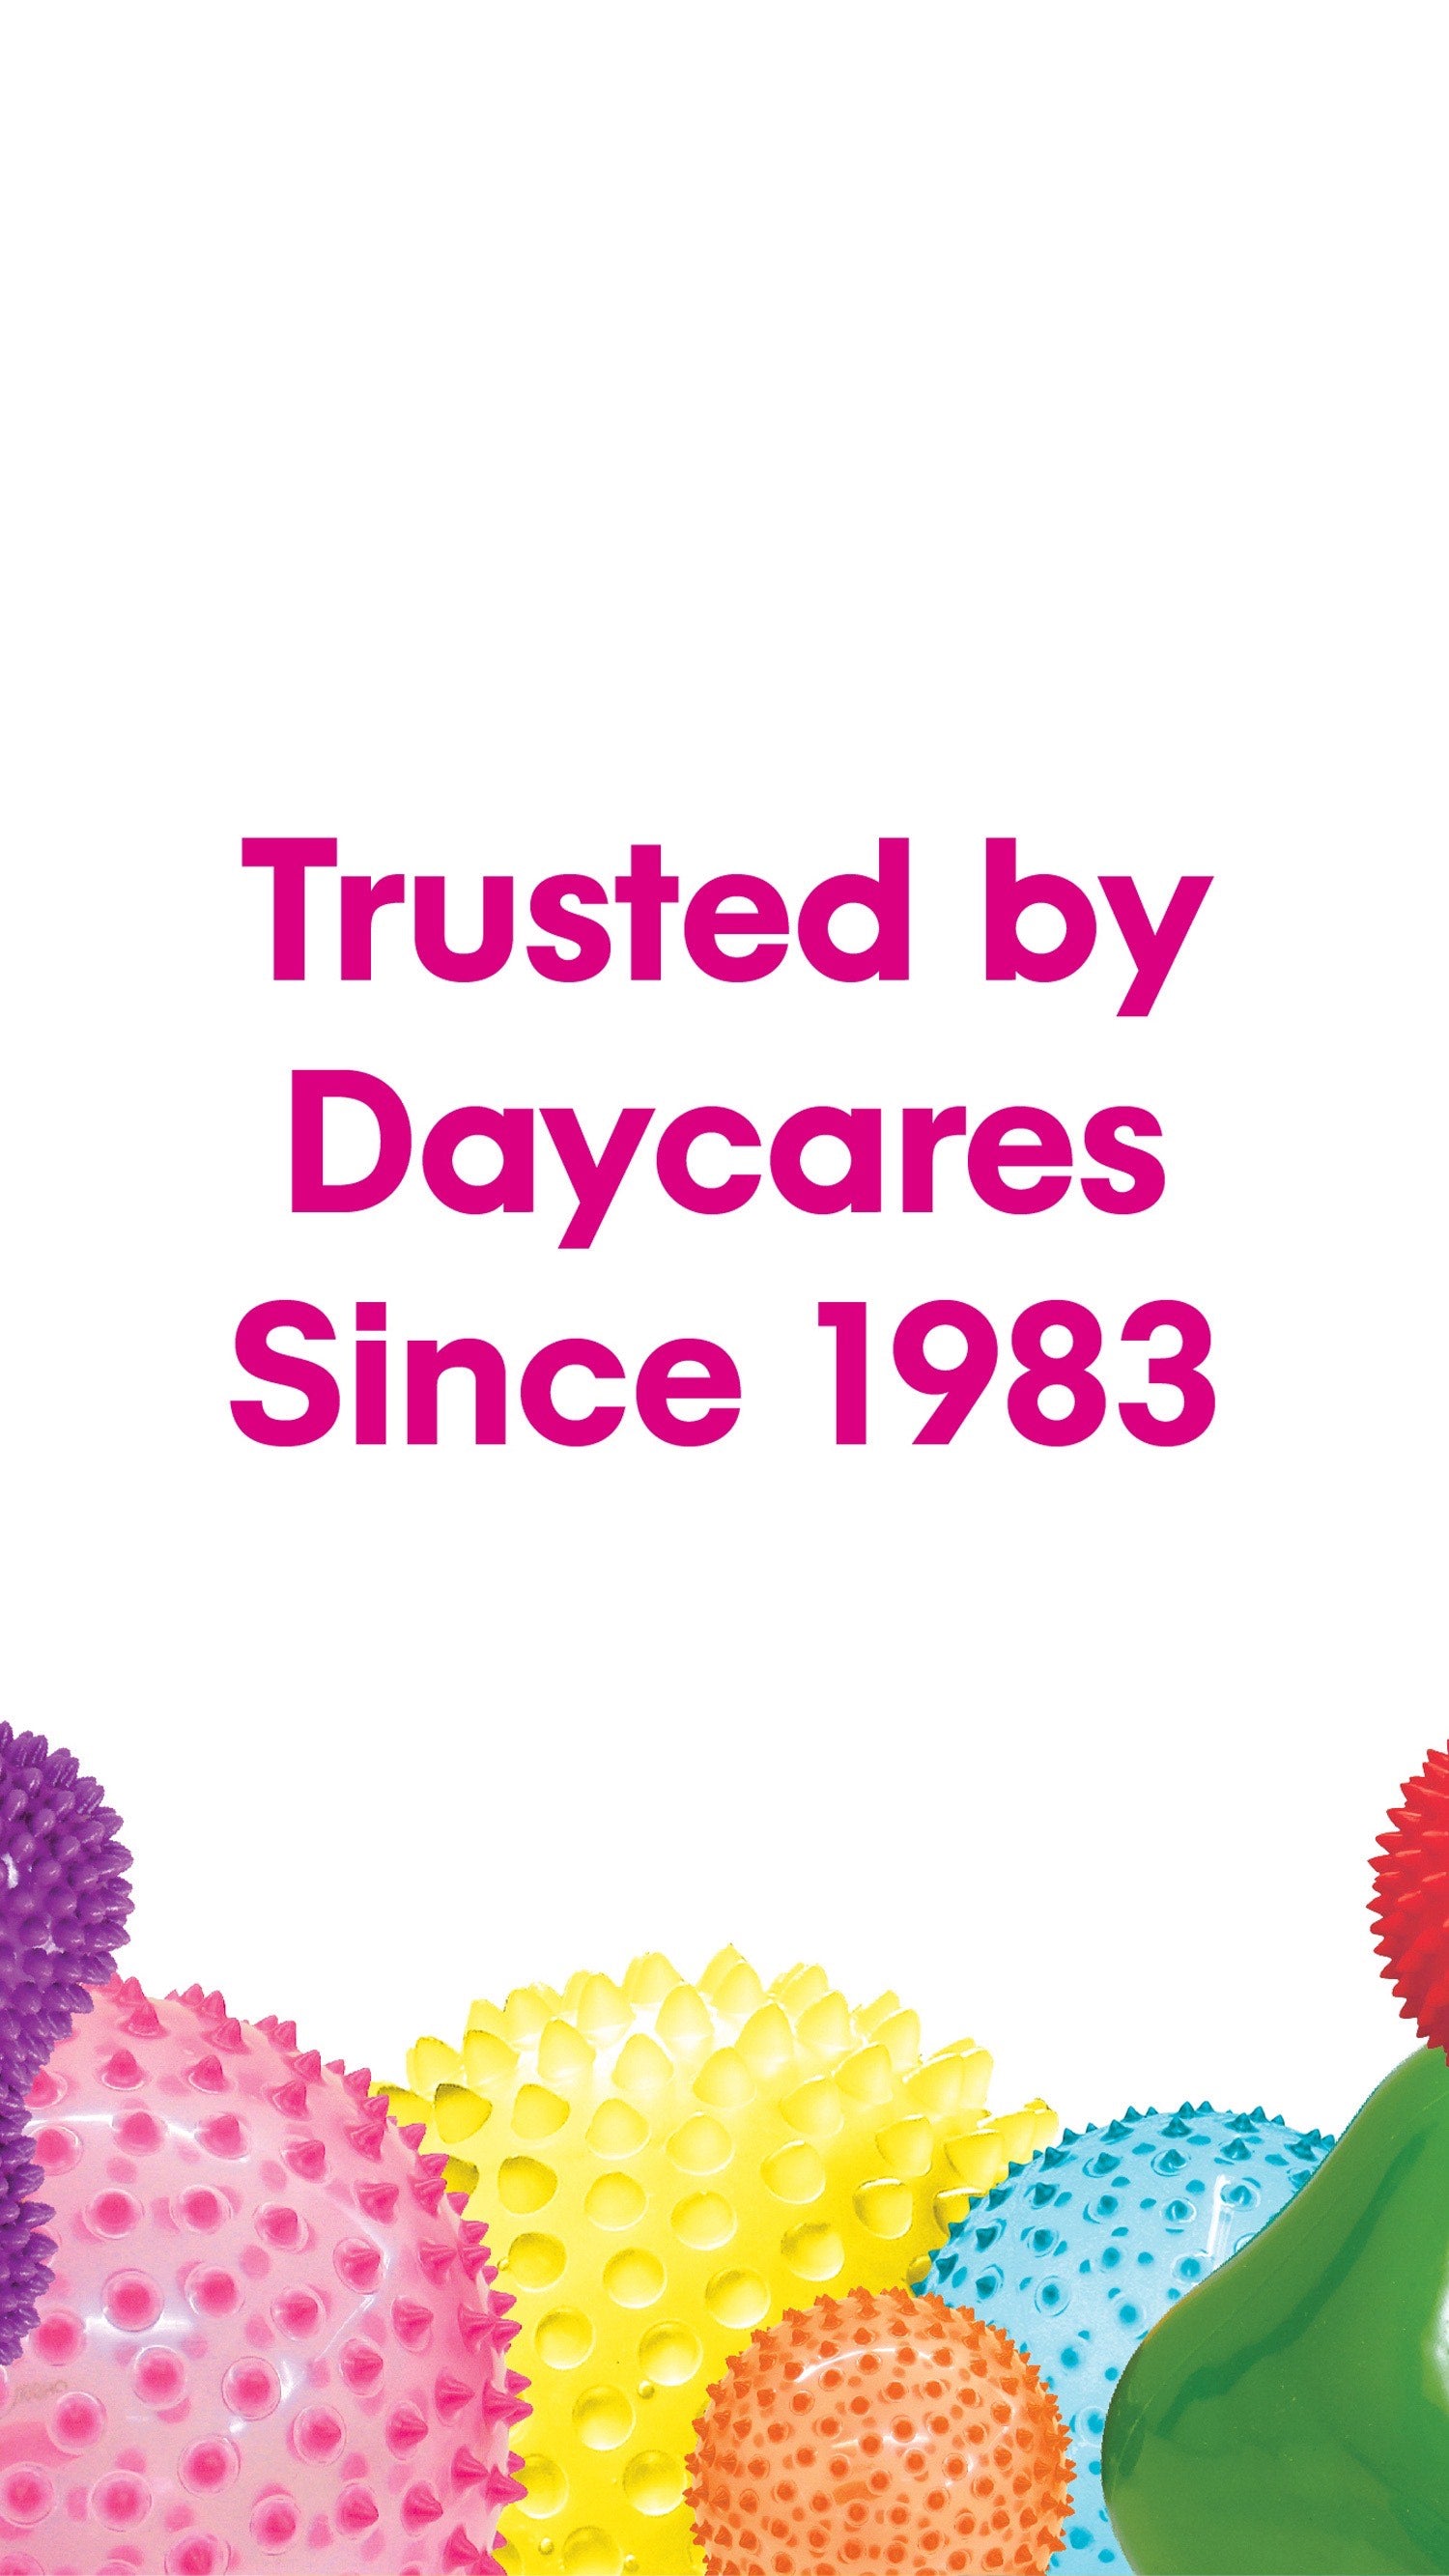 Edushape children toys is trusted by daycares since 1983